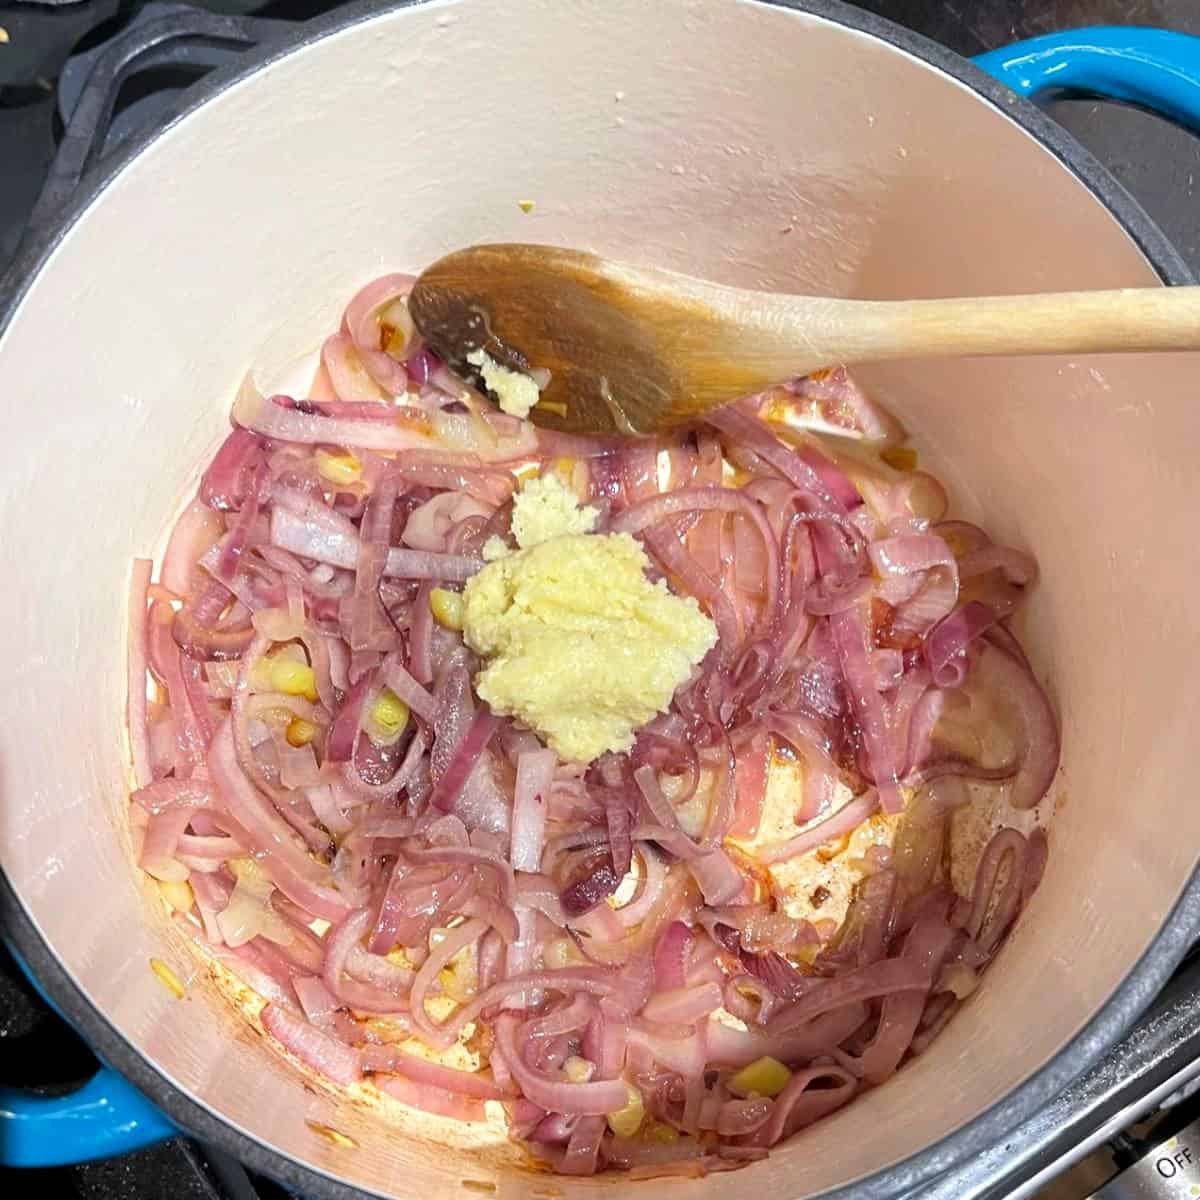 Garlic added to onions in Dutch oven.